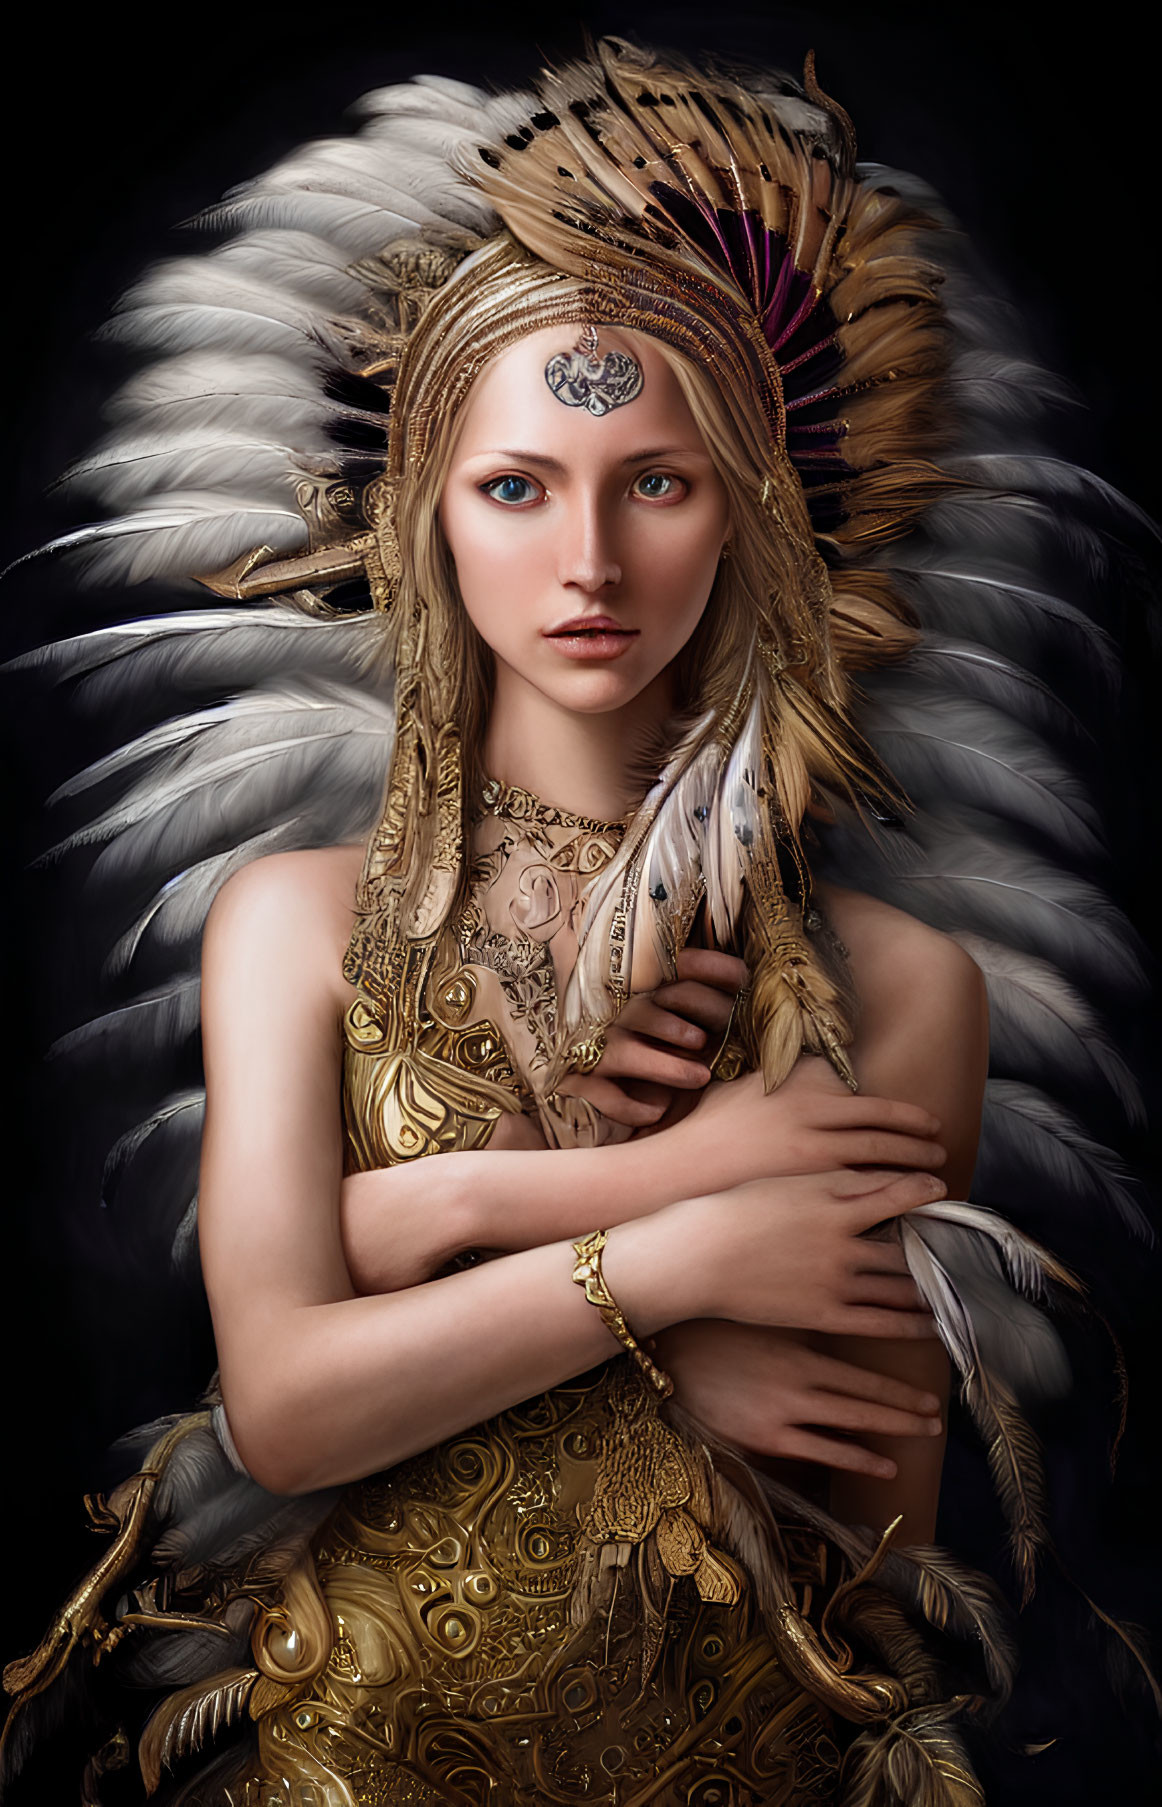 Portrait of Woman in Feather Headdress and Gold Armor with Tattoos and Jewelry